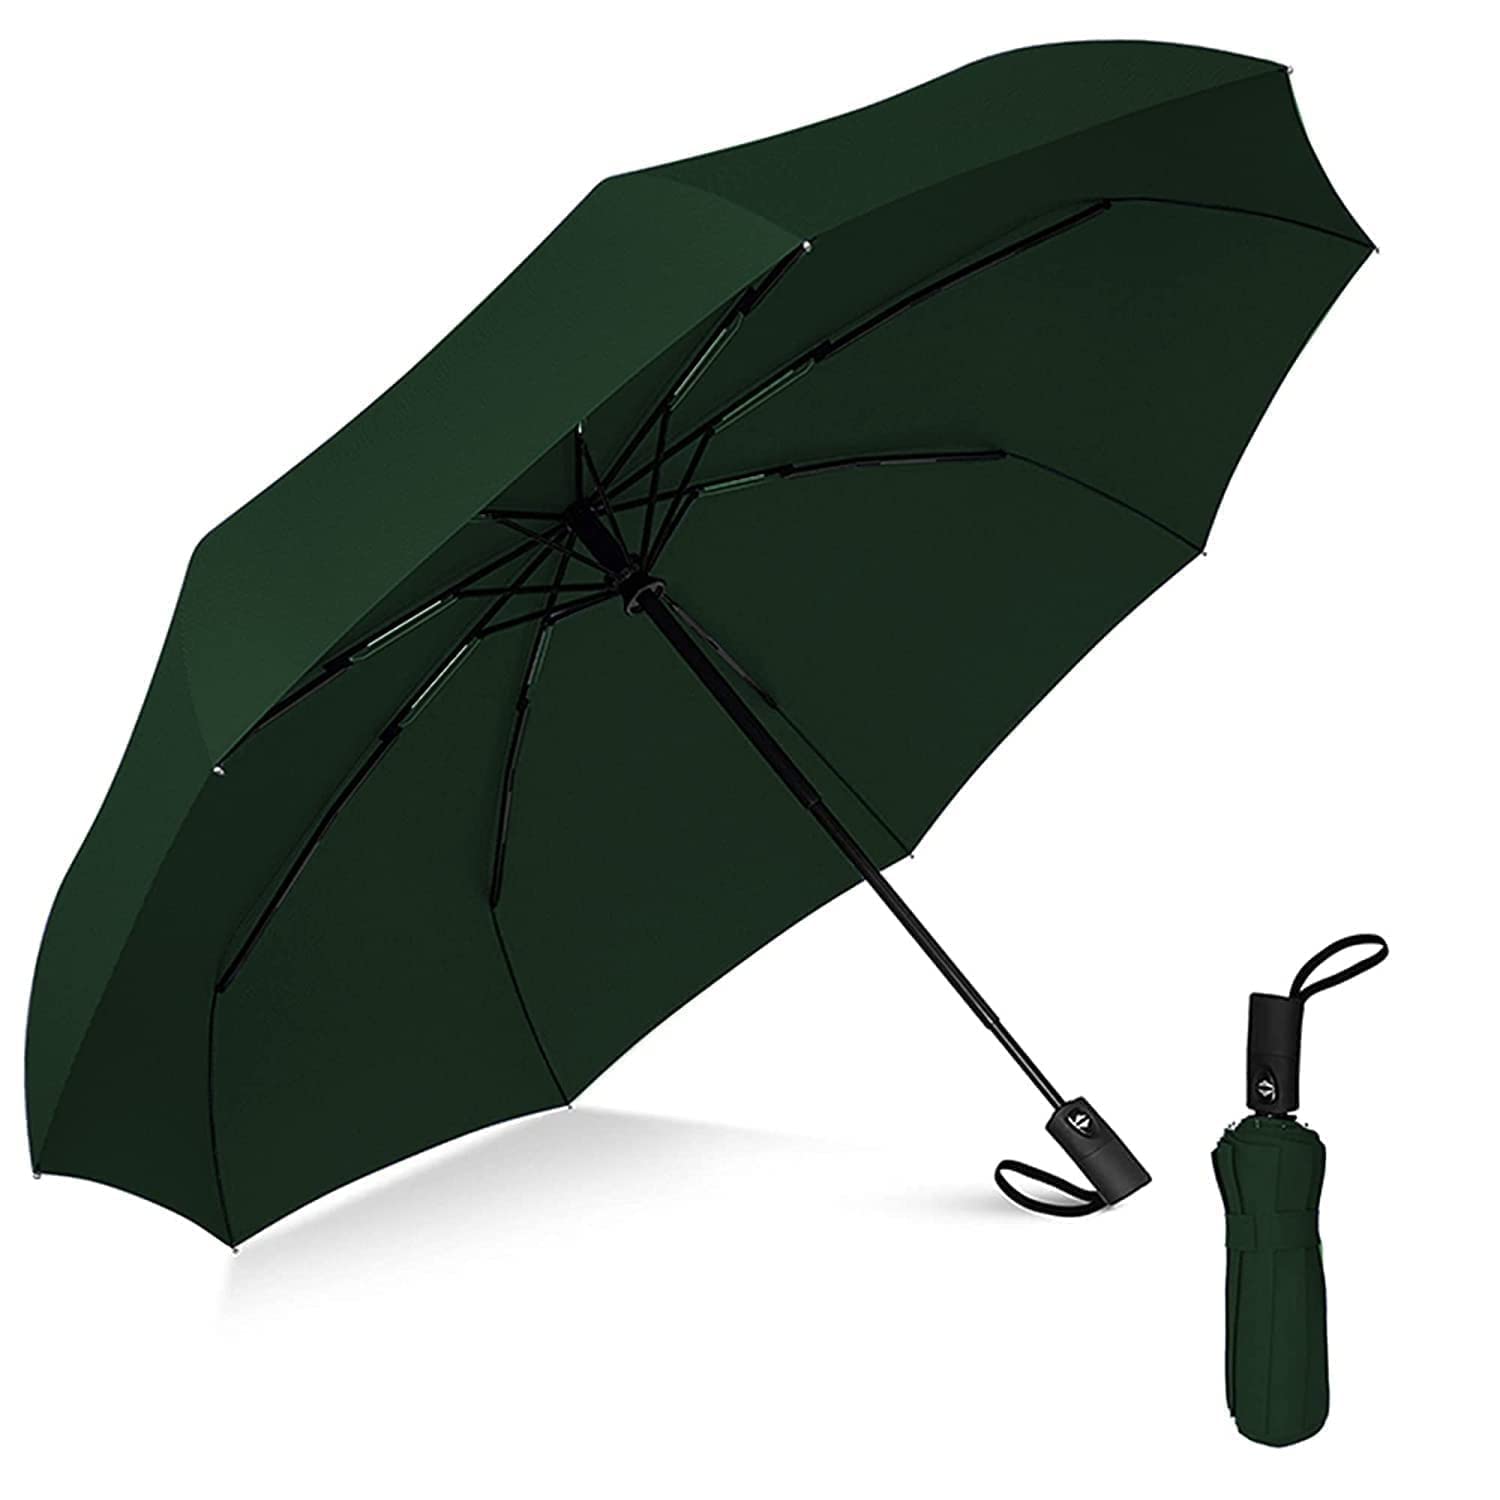 SKYTONE Umbrella for Men and Women– 3 Fold with Auto Open and Close 43 Inch Large Umbrella